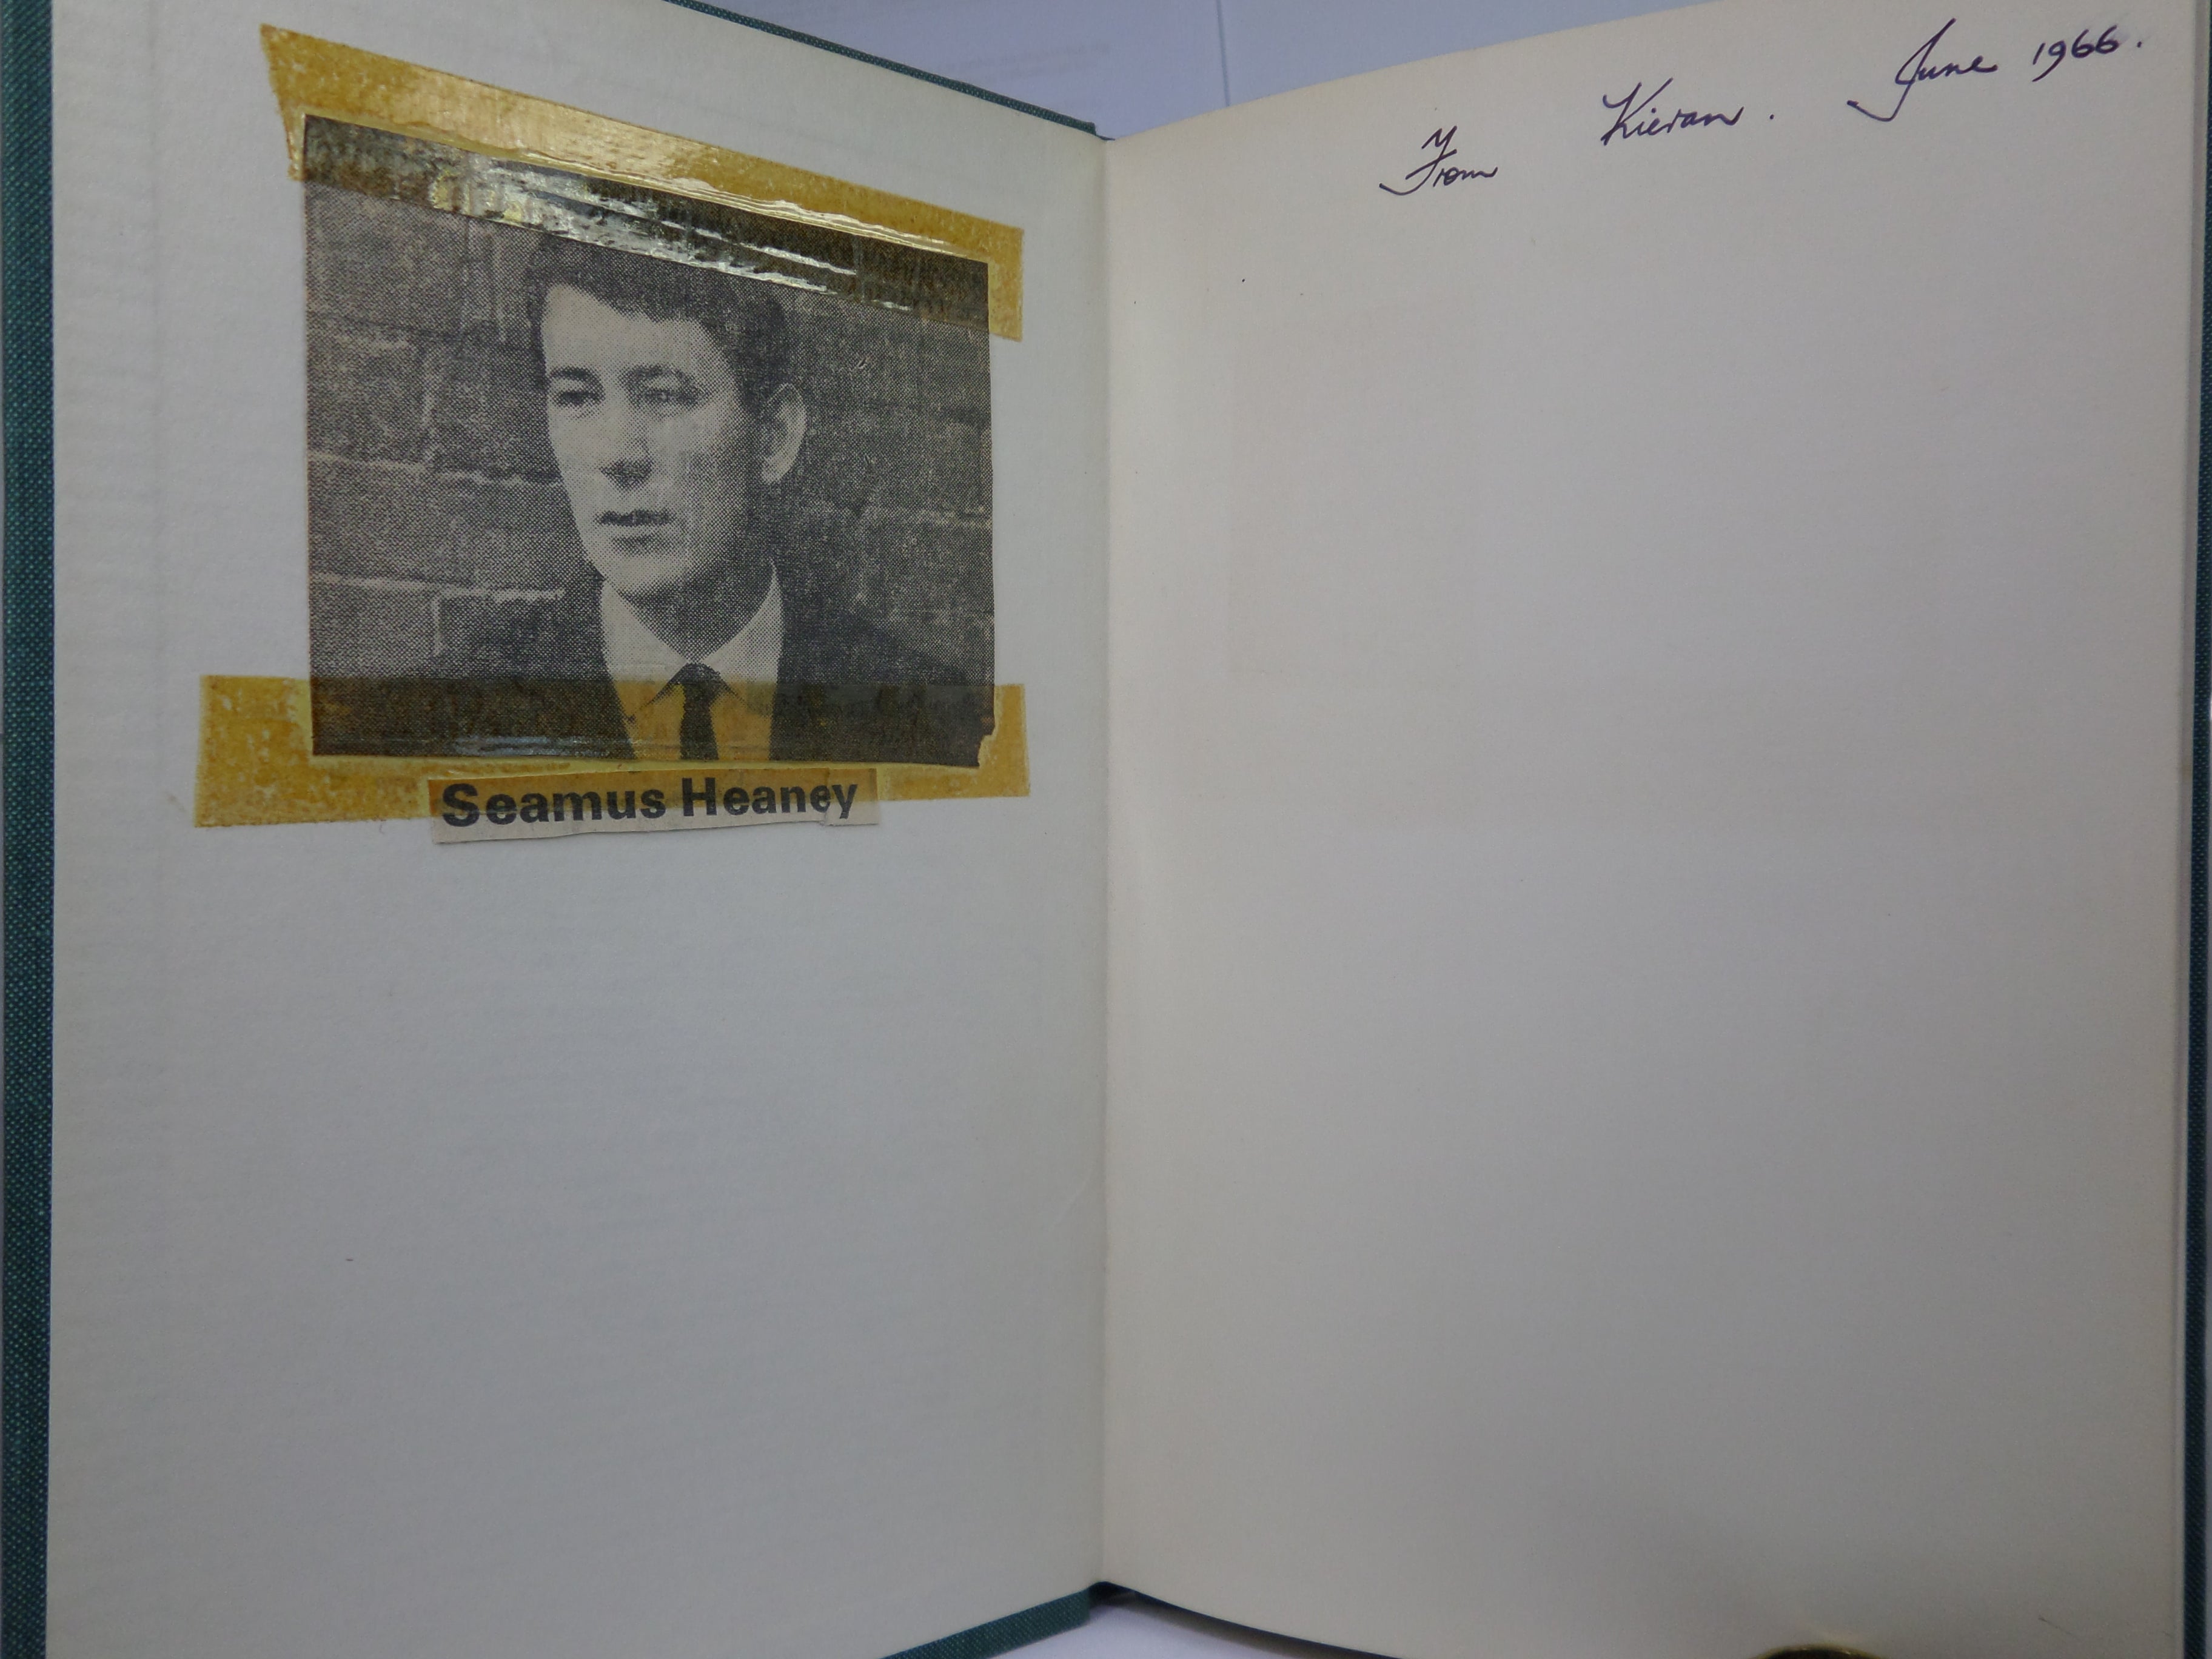 DEATH OF A NATURALIST BY SEAMUS HEANEY 1966 FIRST EDITION